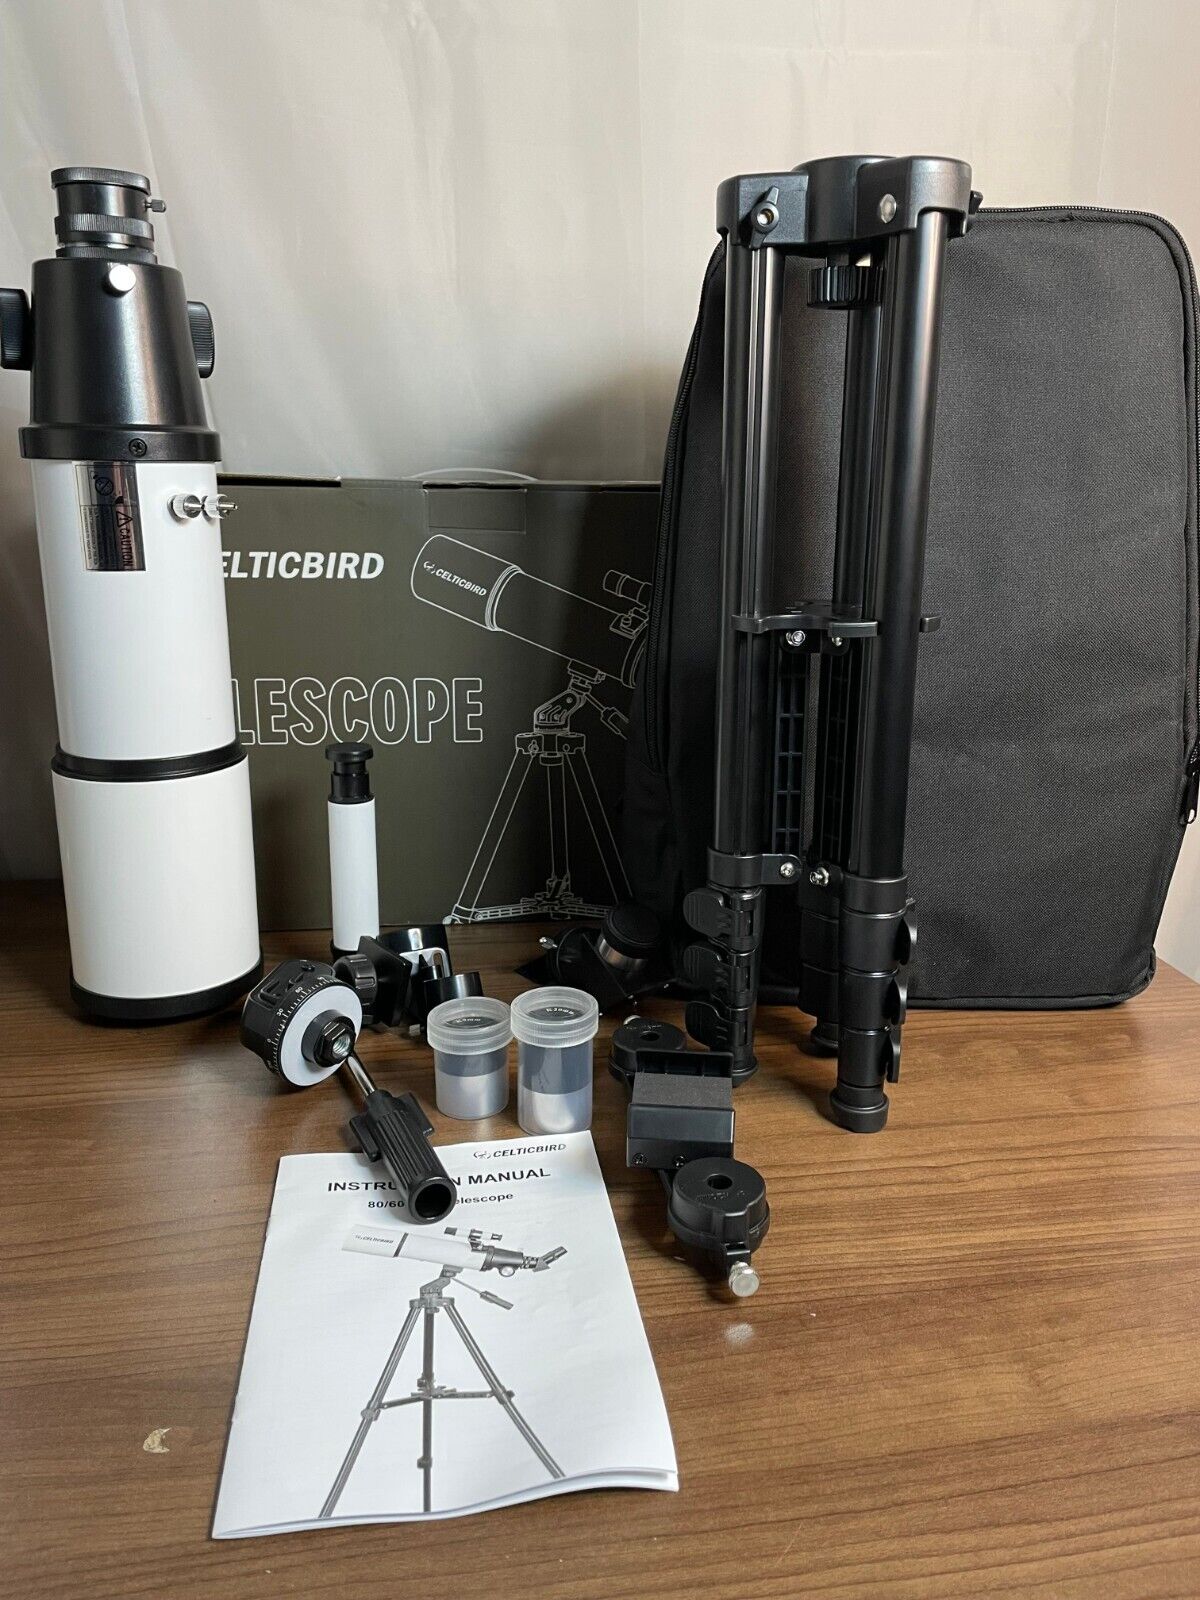 Celticbird 80600 White Black Telescope With Tripod Head & Carrying Case